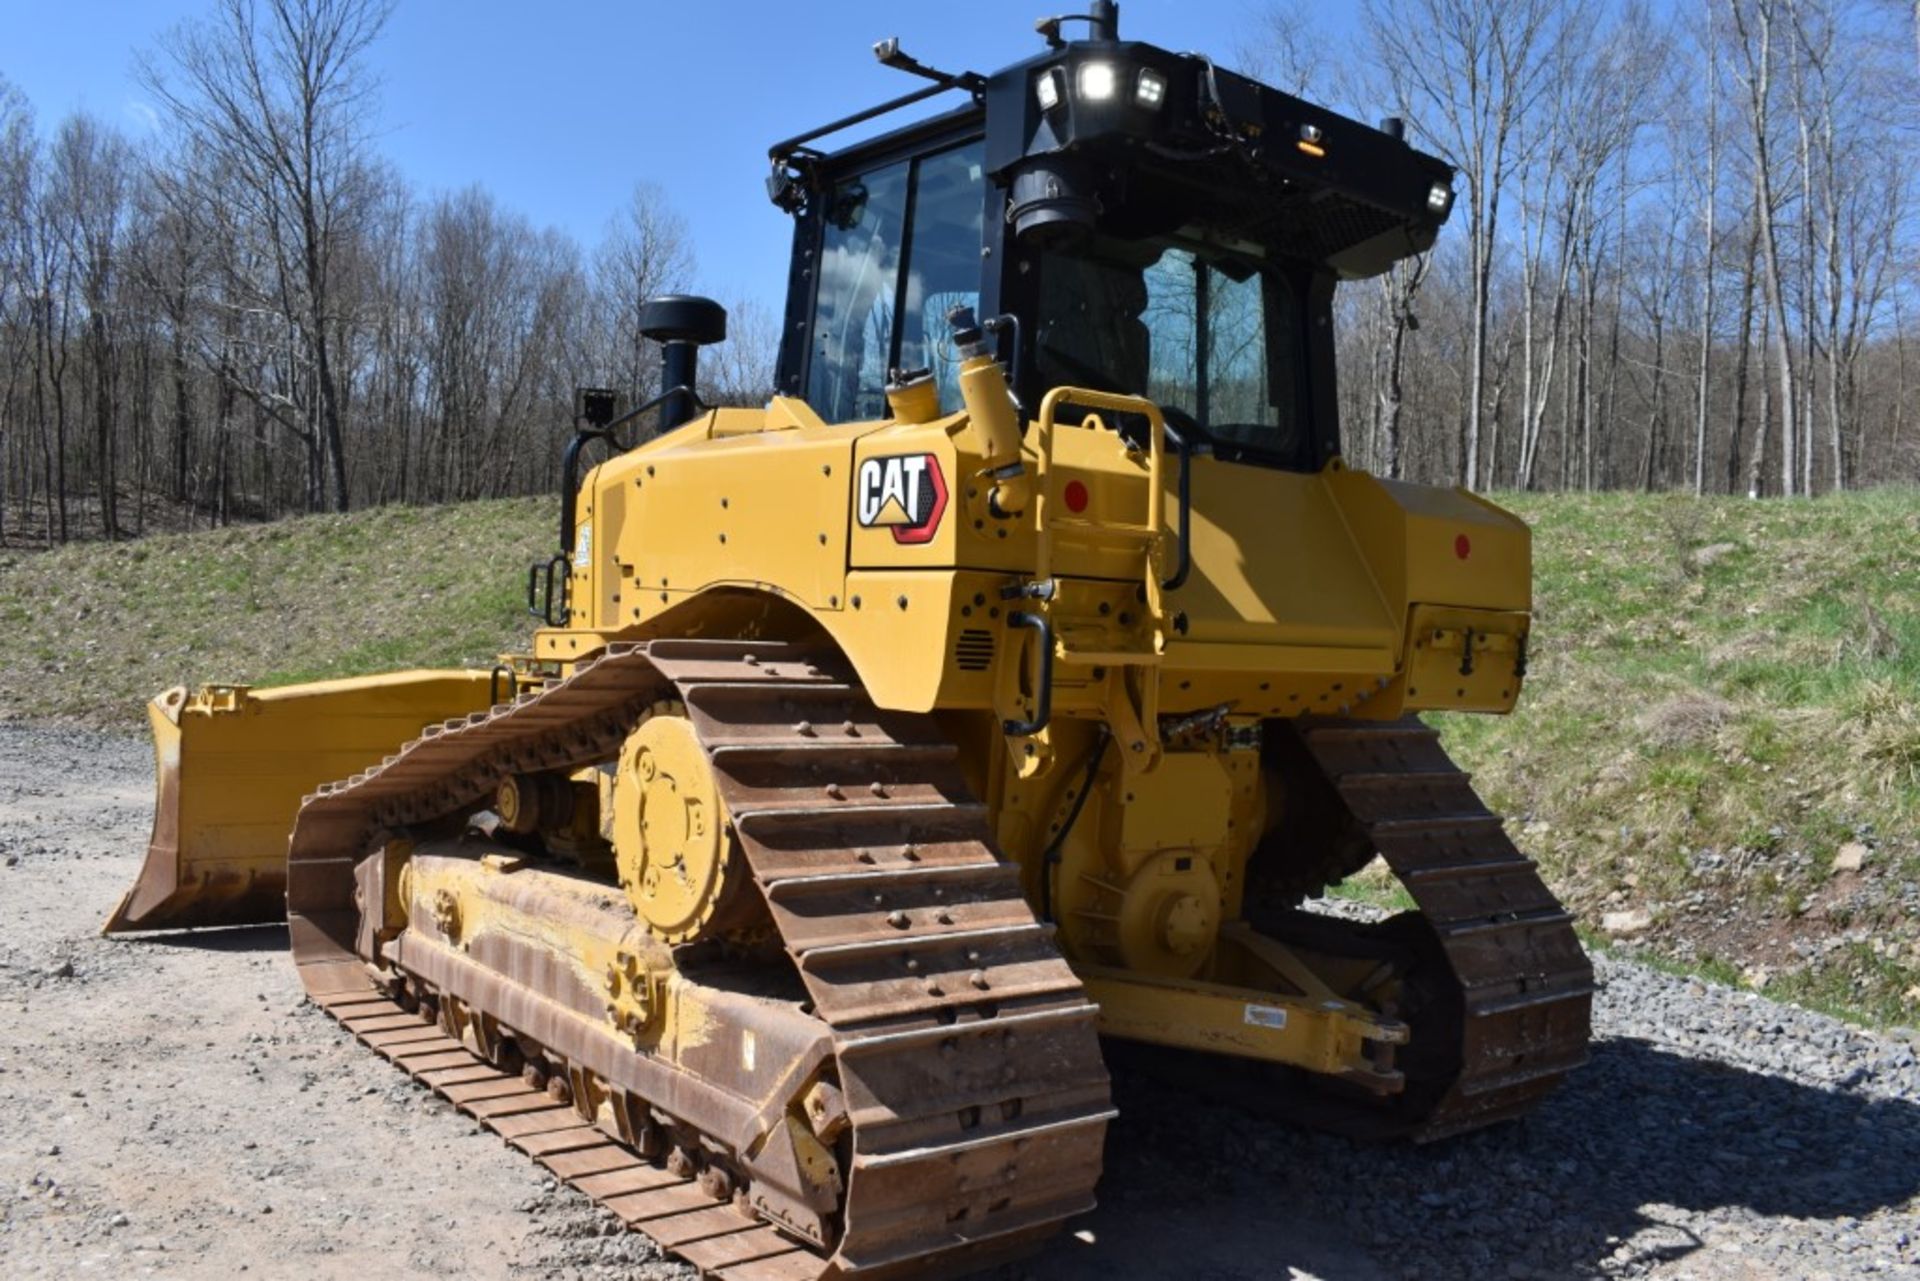 2022 CAT D6 LGP Dozer 1762 Hours, Runs and Operates, 158" 6 Way Blade, New Cutting Edge, Ripper - Image 6 of 56